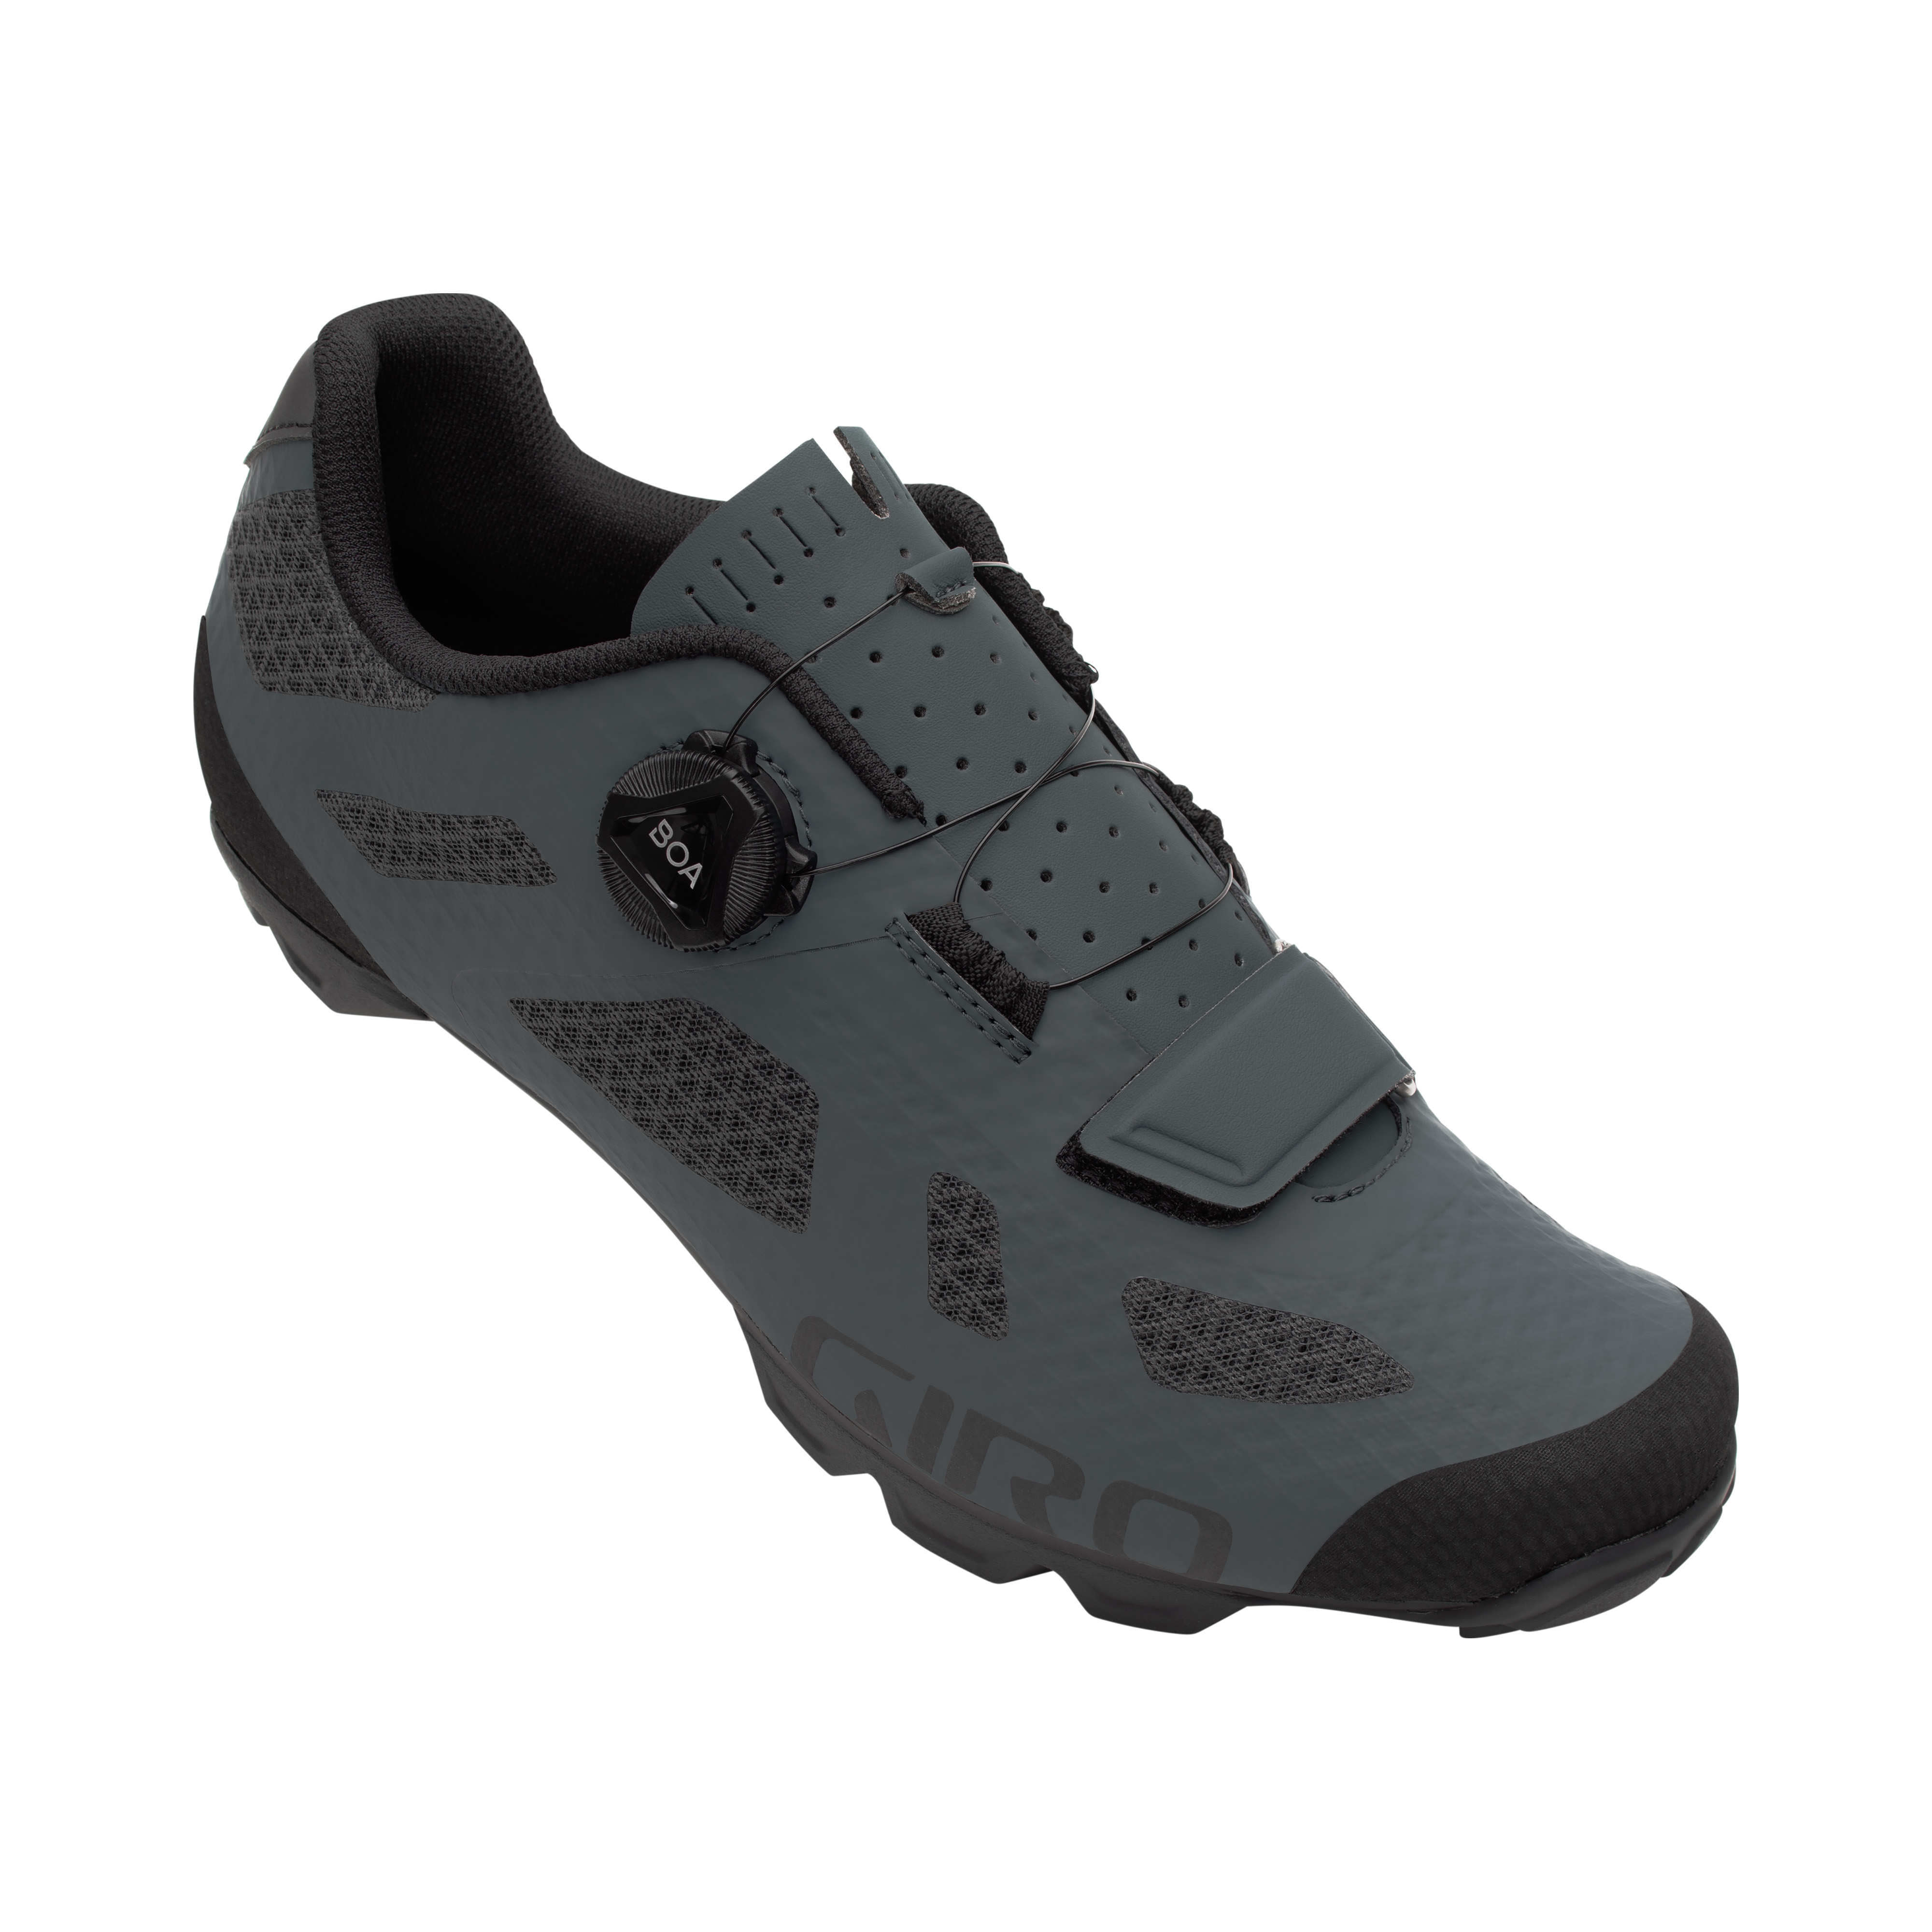 Leatt Cycling Shoes: Pro Bike Sneakers for Bicycle Riding | Jenson USA